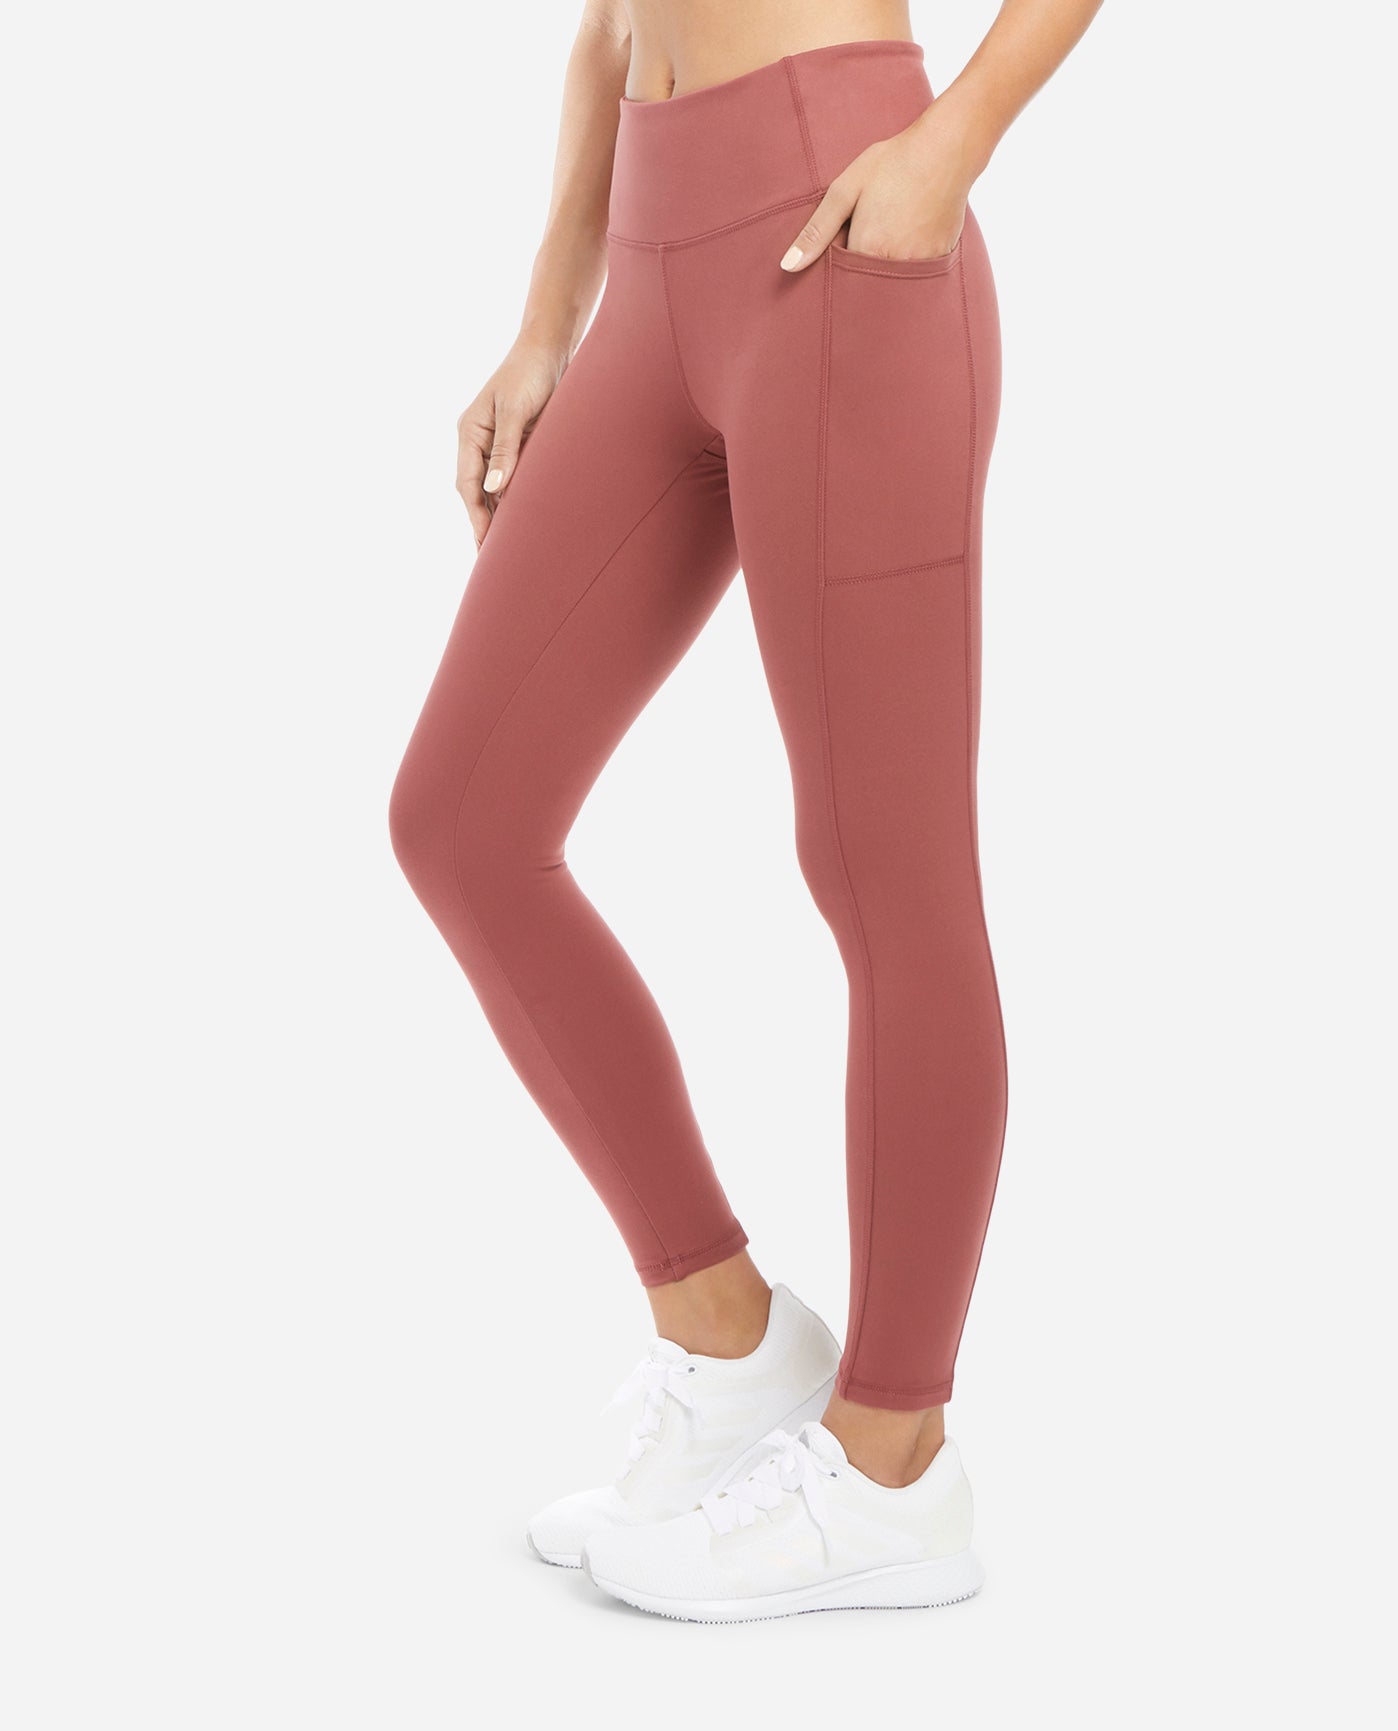 Danskin Ladies' High Rise Tight with Pockets